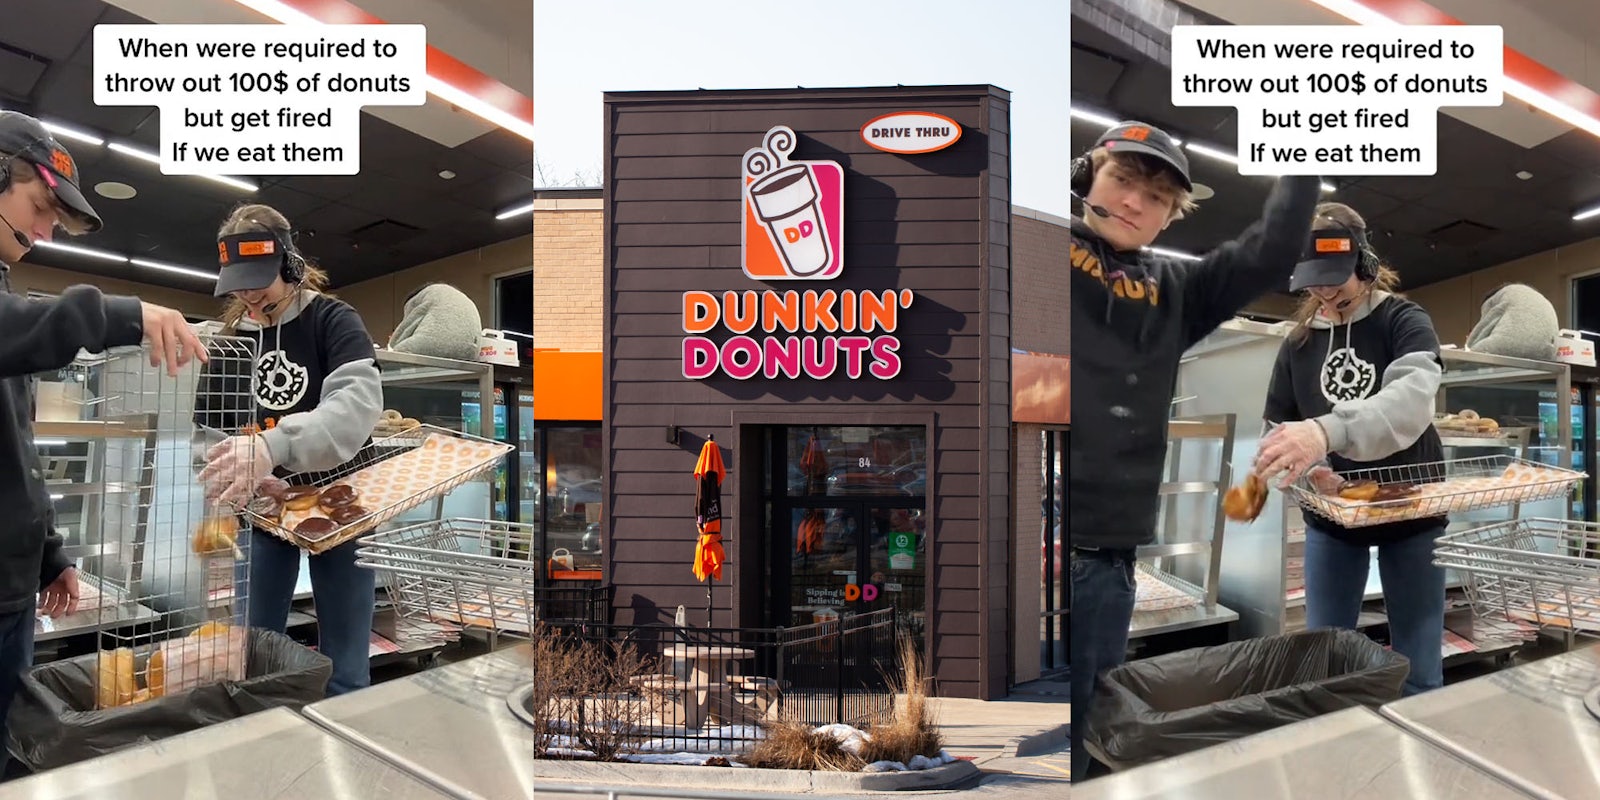 Dunkin' employees throwing away donuts caption 'When were required to throw out 100$ worth of donuts but get fired if we eat them' (l) Dunkin' Donuts building with sign (c) Dunkin' employees throwing away donuts caption 'When were required to throw out 100$ worth of donuts but get fired if we eat them' (r)